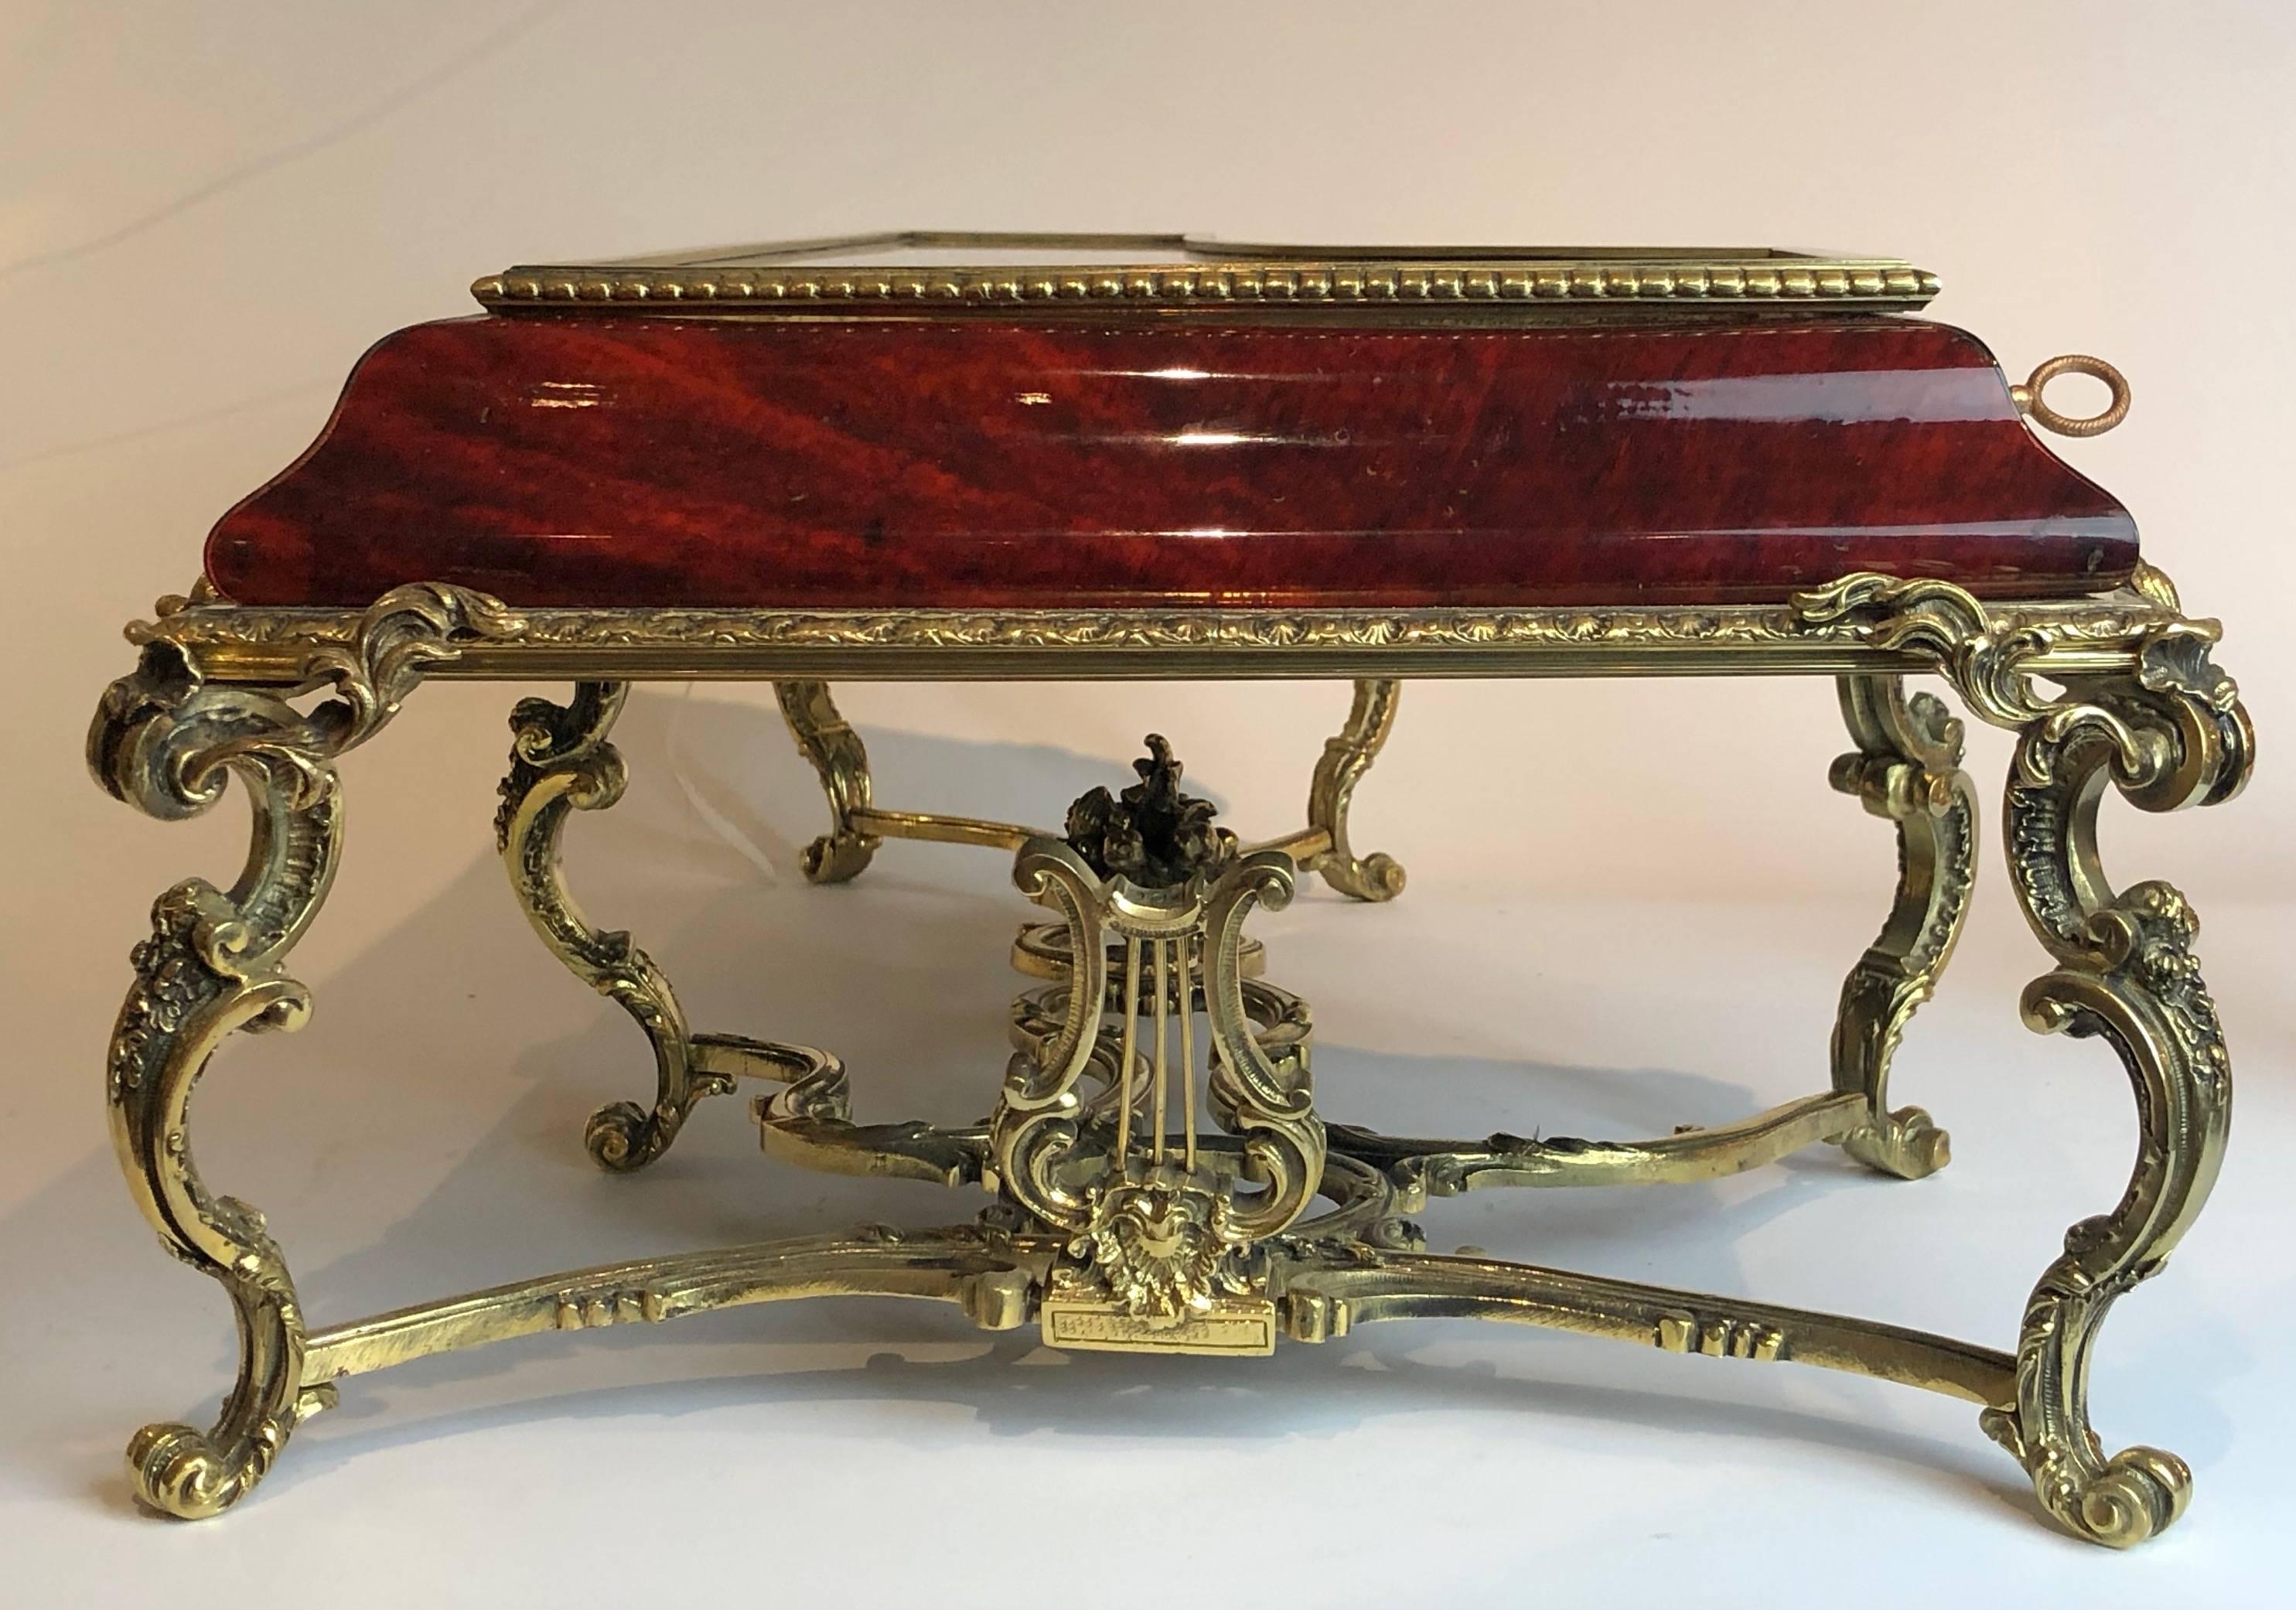 19th Century Faux Tortoiseshell and Ormolu Tabletop Vitrine in the Form of a Grand Piano